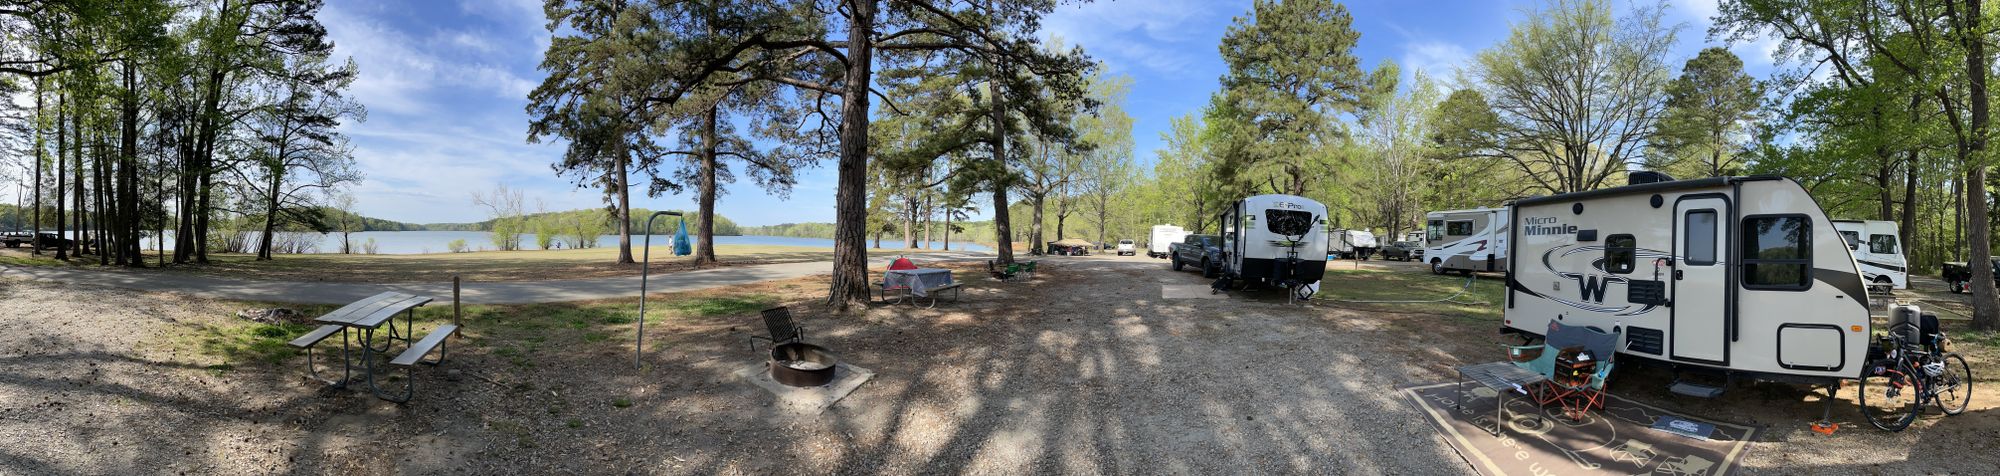 Panoramic view of the lake, trees, picnic tables, fire pits, neighbors' trailer, and the Minniebago.